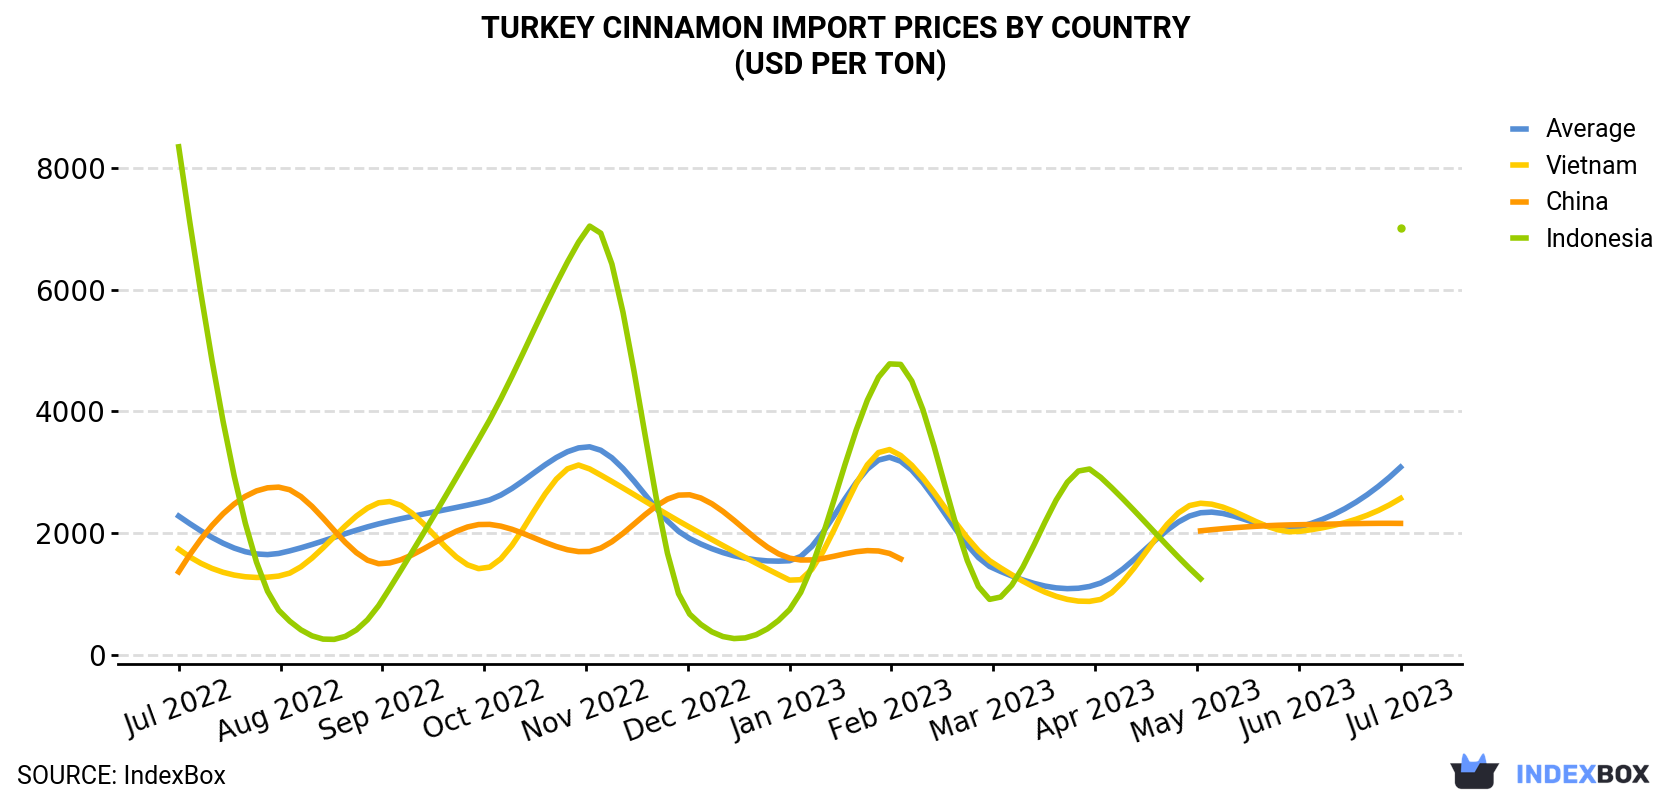 Turkey Cinnamon Import Prices By Country (USD Per Ton)